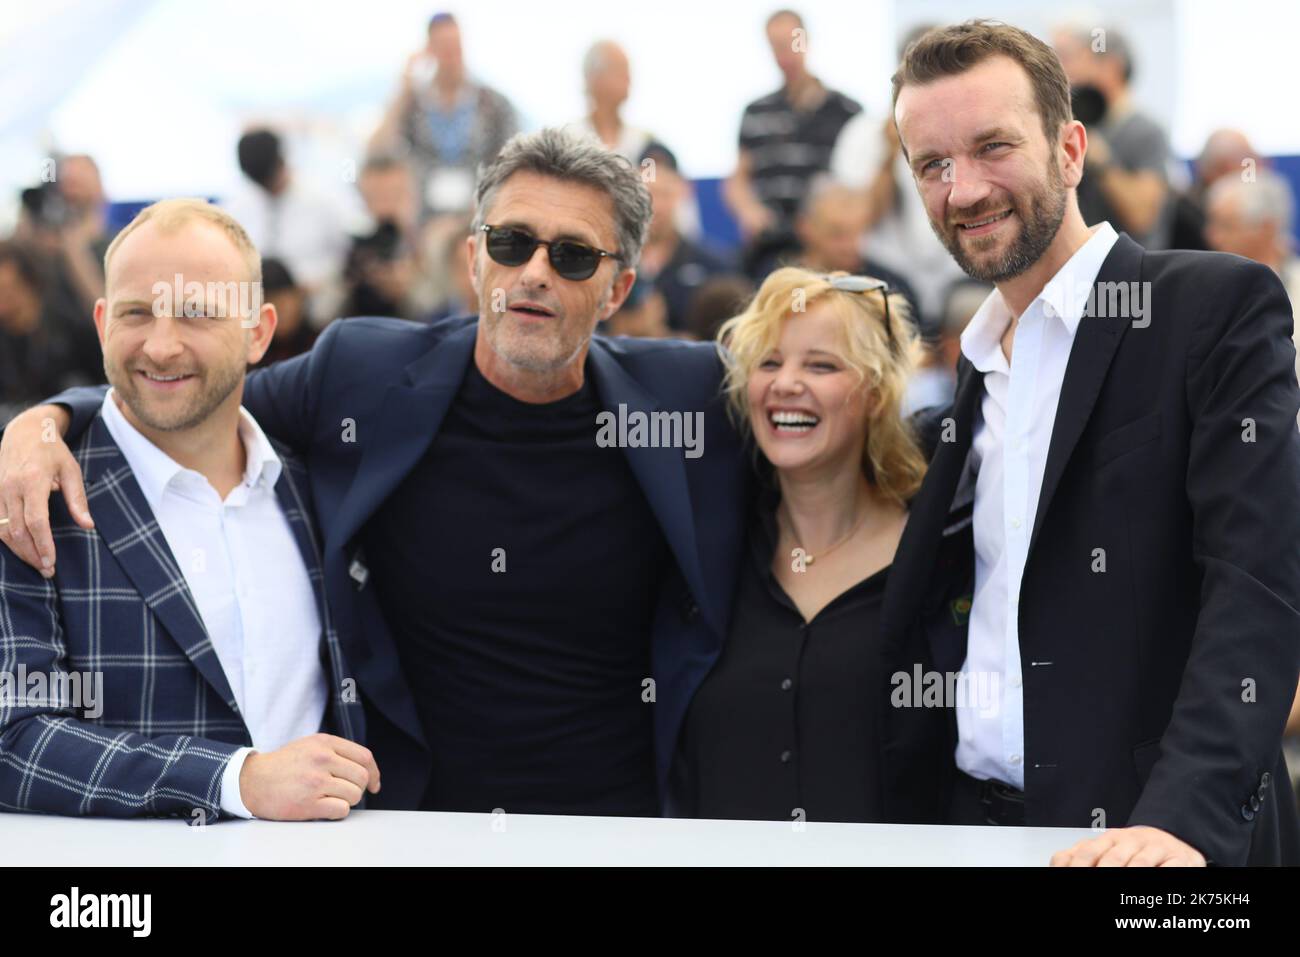 (FromL) Polish director Pawel Pawlikowski, Polish actress Joanna Kulig and Polish actor Tomasz Kot pose on May 11, 2018 during a photocall for the film 'Cold War (Zimna Wojna)' at the 71st edition of the Cannes Film Festival in Cannes, southern France. Stock Photo